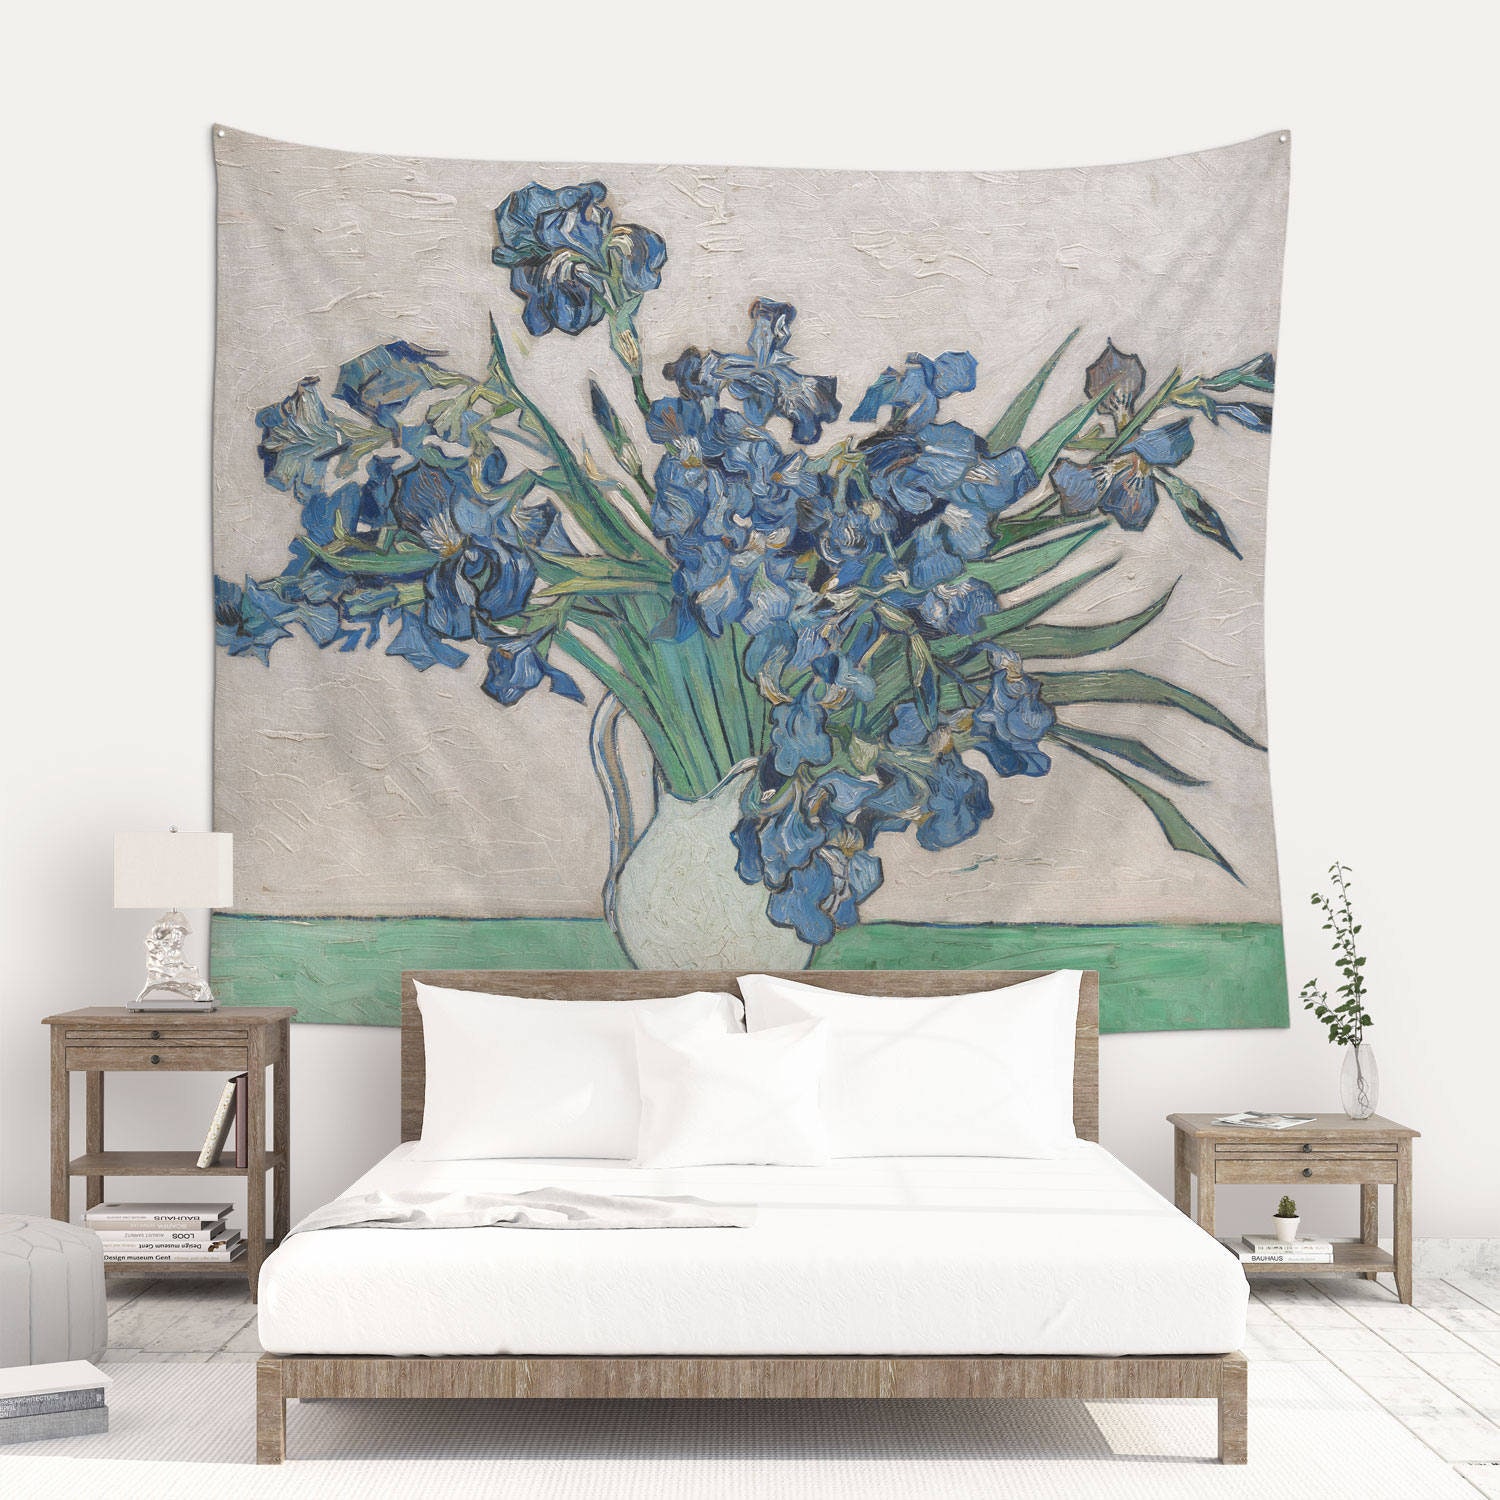 WALL JACQUARD WOVEN TAPESTRY Swan Family LAKE VIEW - IRIS FLOWERS & WILLOW  TREES